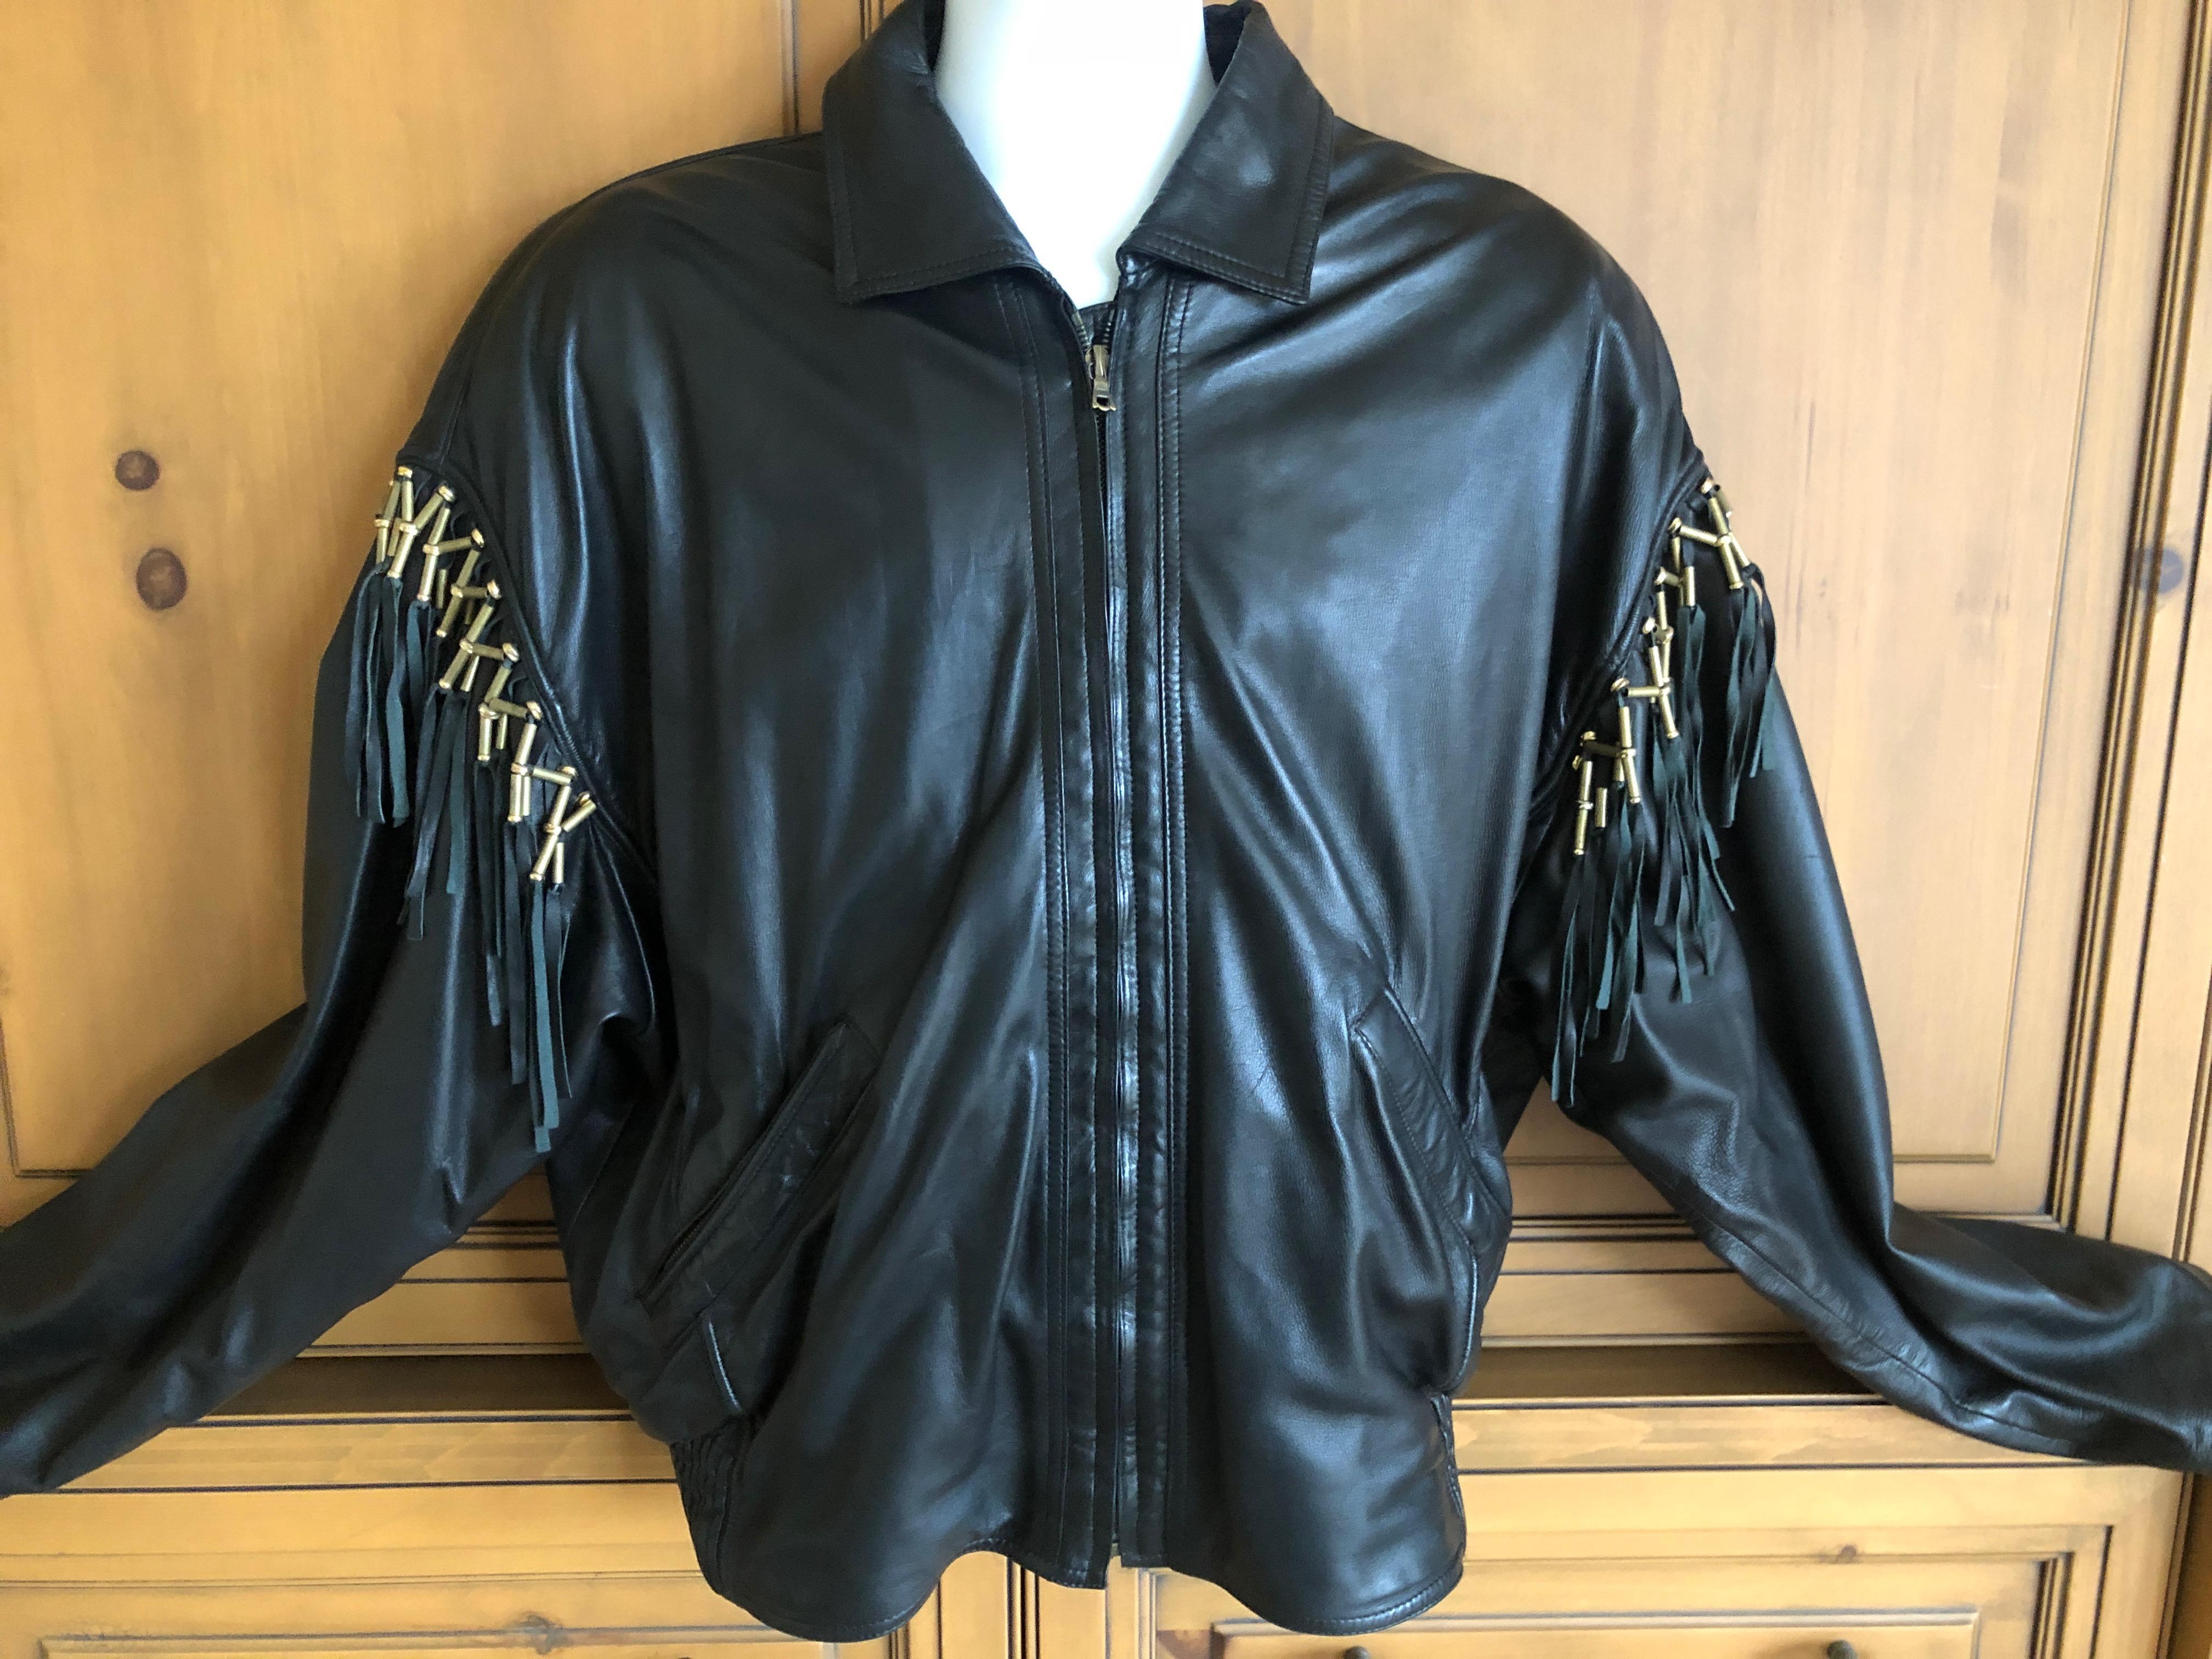 Gianni Versace 1984 Lambskin Leather Men's Jacket with Beaded Fringe For Sale 2